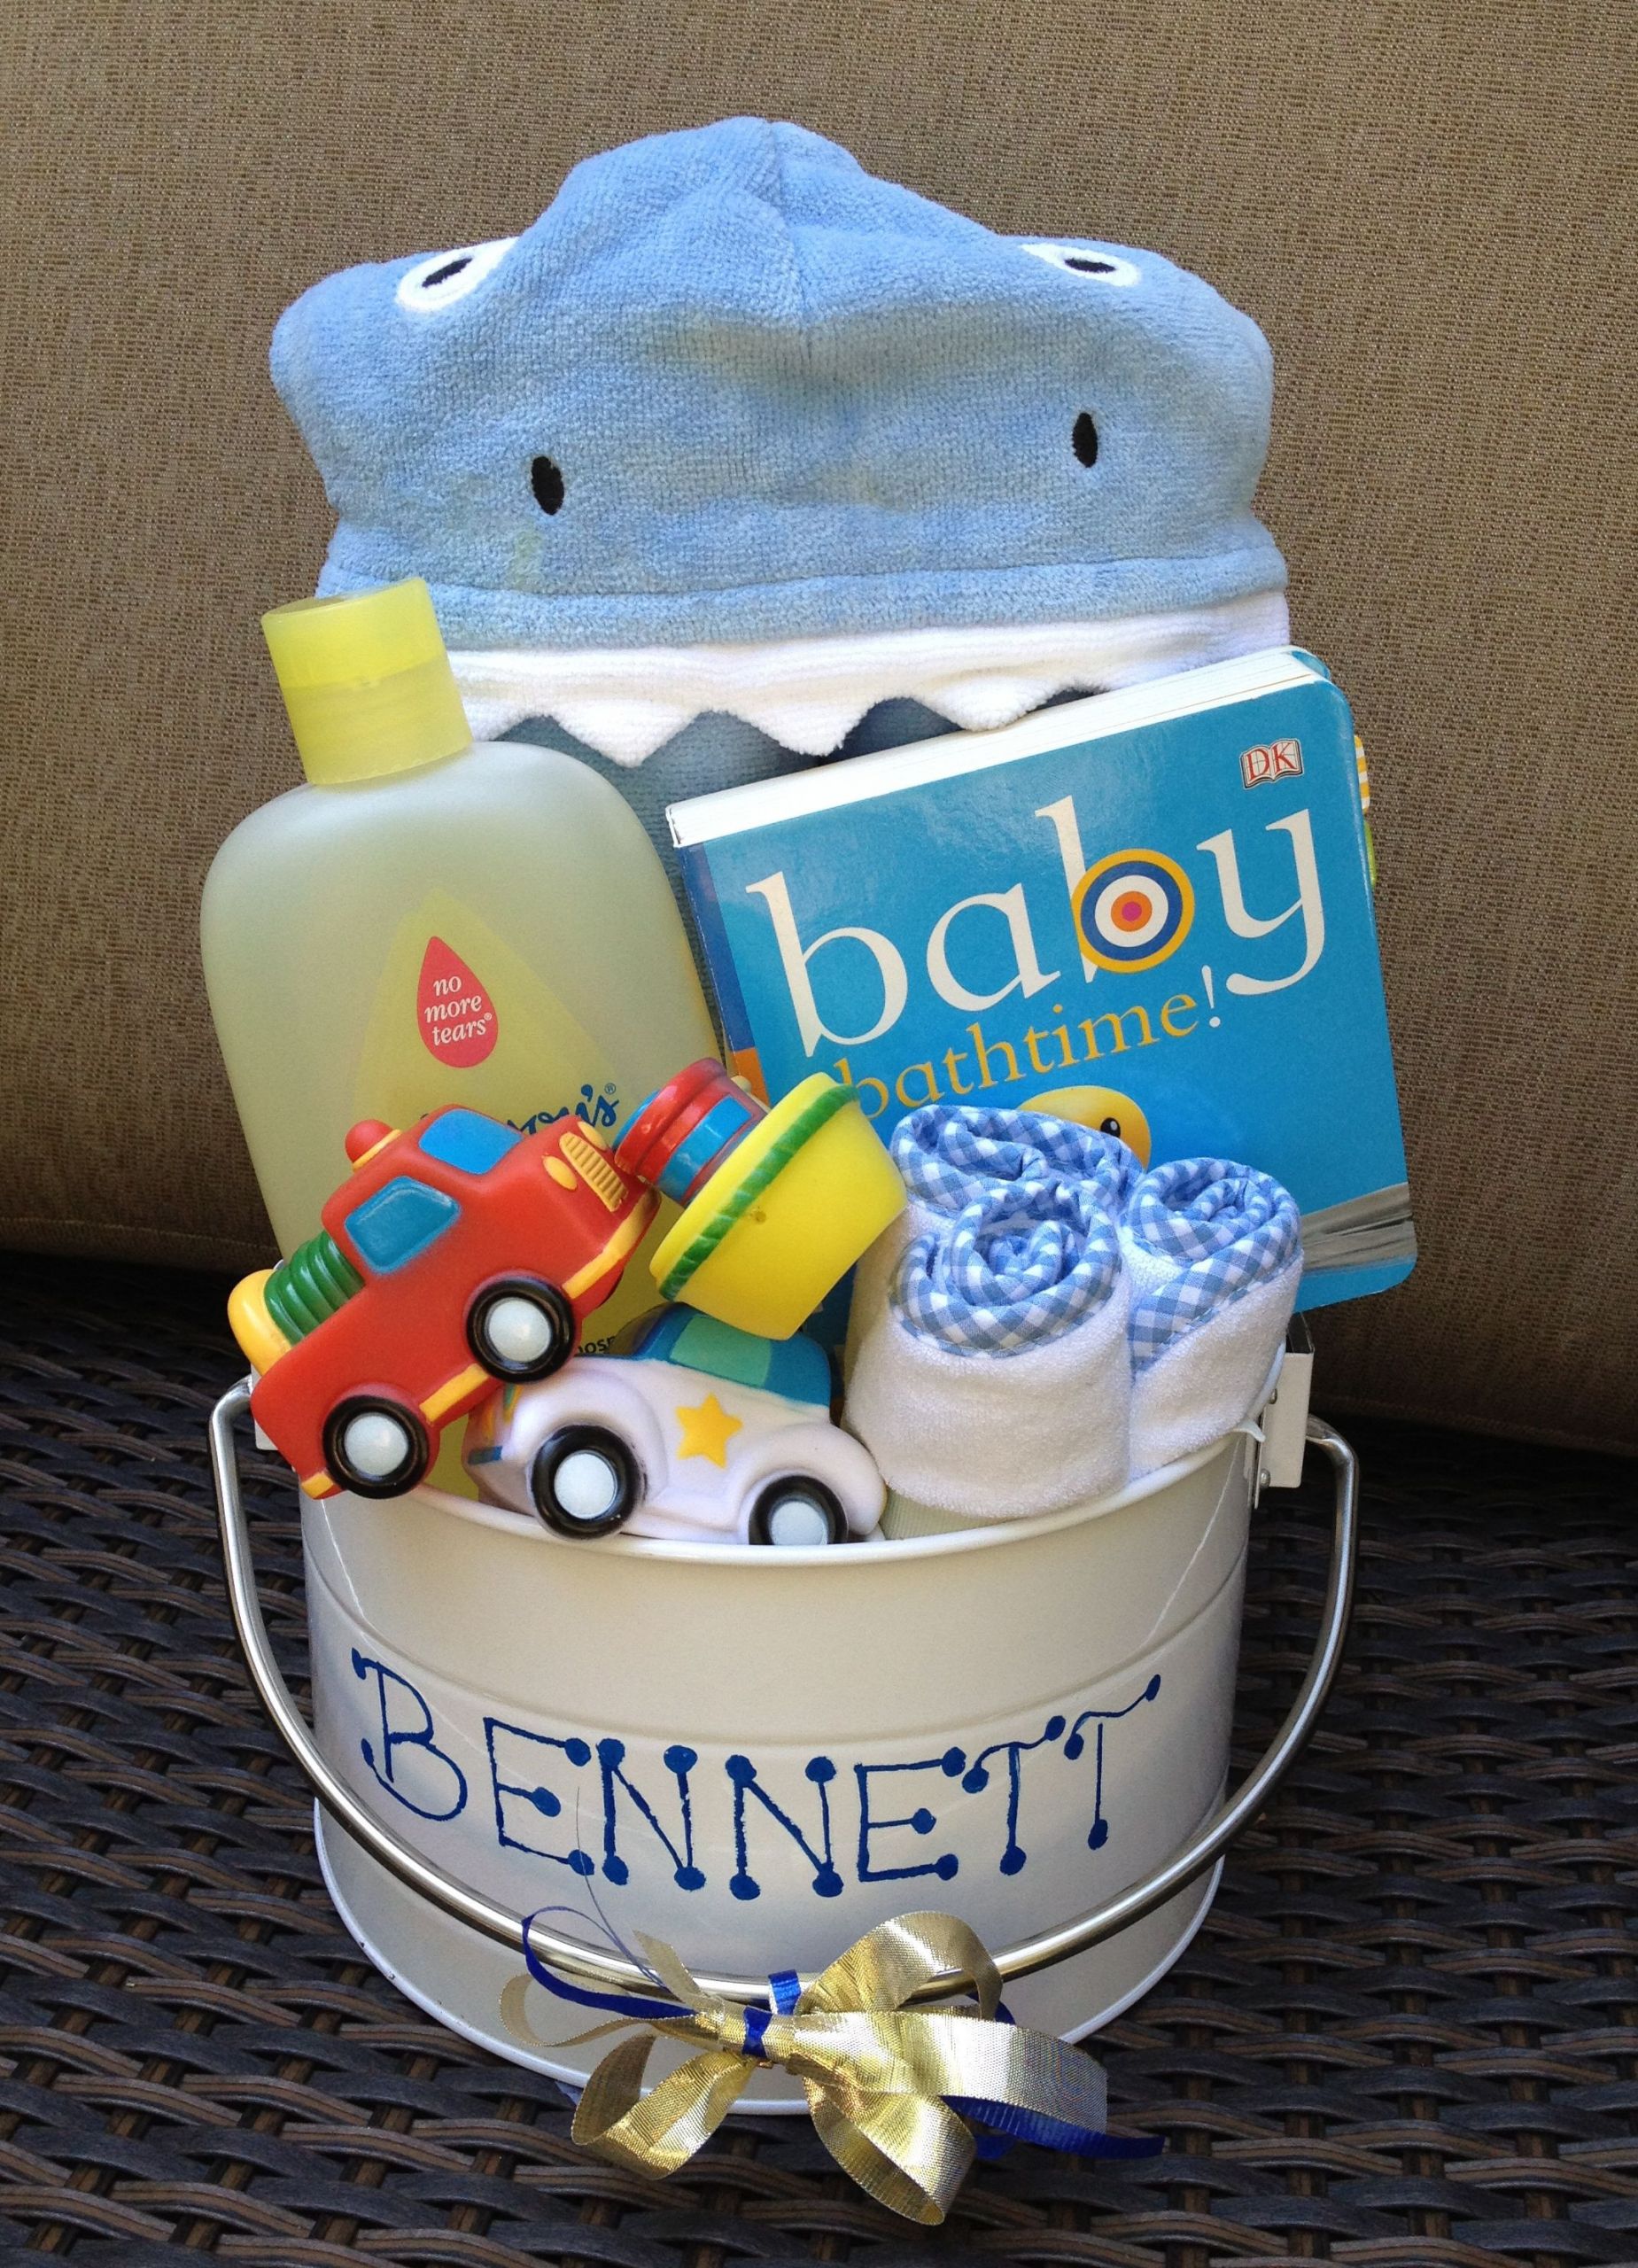 Gift Ideas For A Newborn Baby Boy
 Baby Bath Bucket Perfect for baby shower ts for boy or